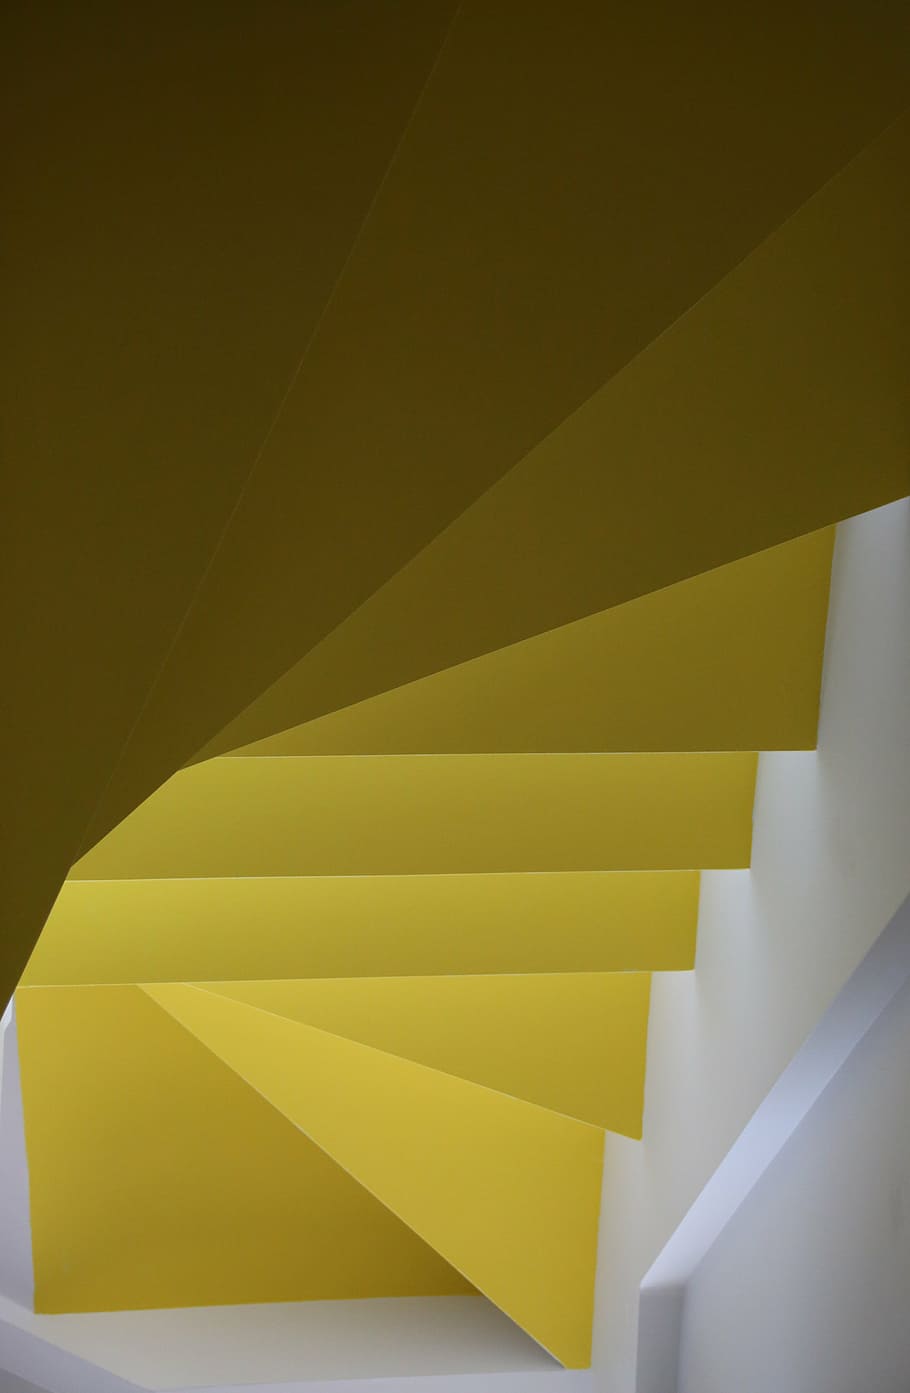 yellow papers, yellow, stairs, steps, wall, architecture, abstract, modern, steps and staircases, built structure